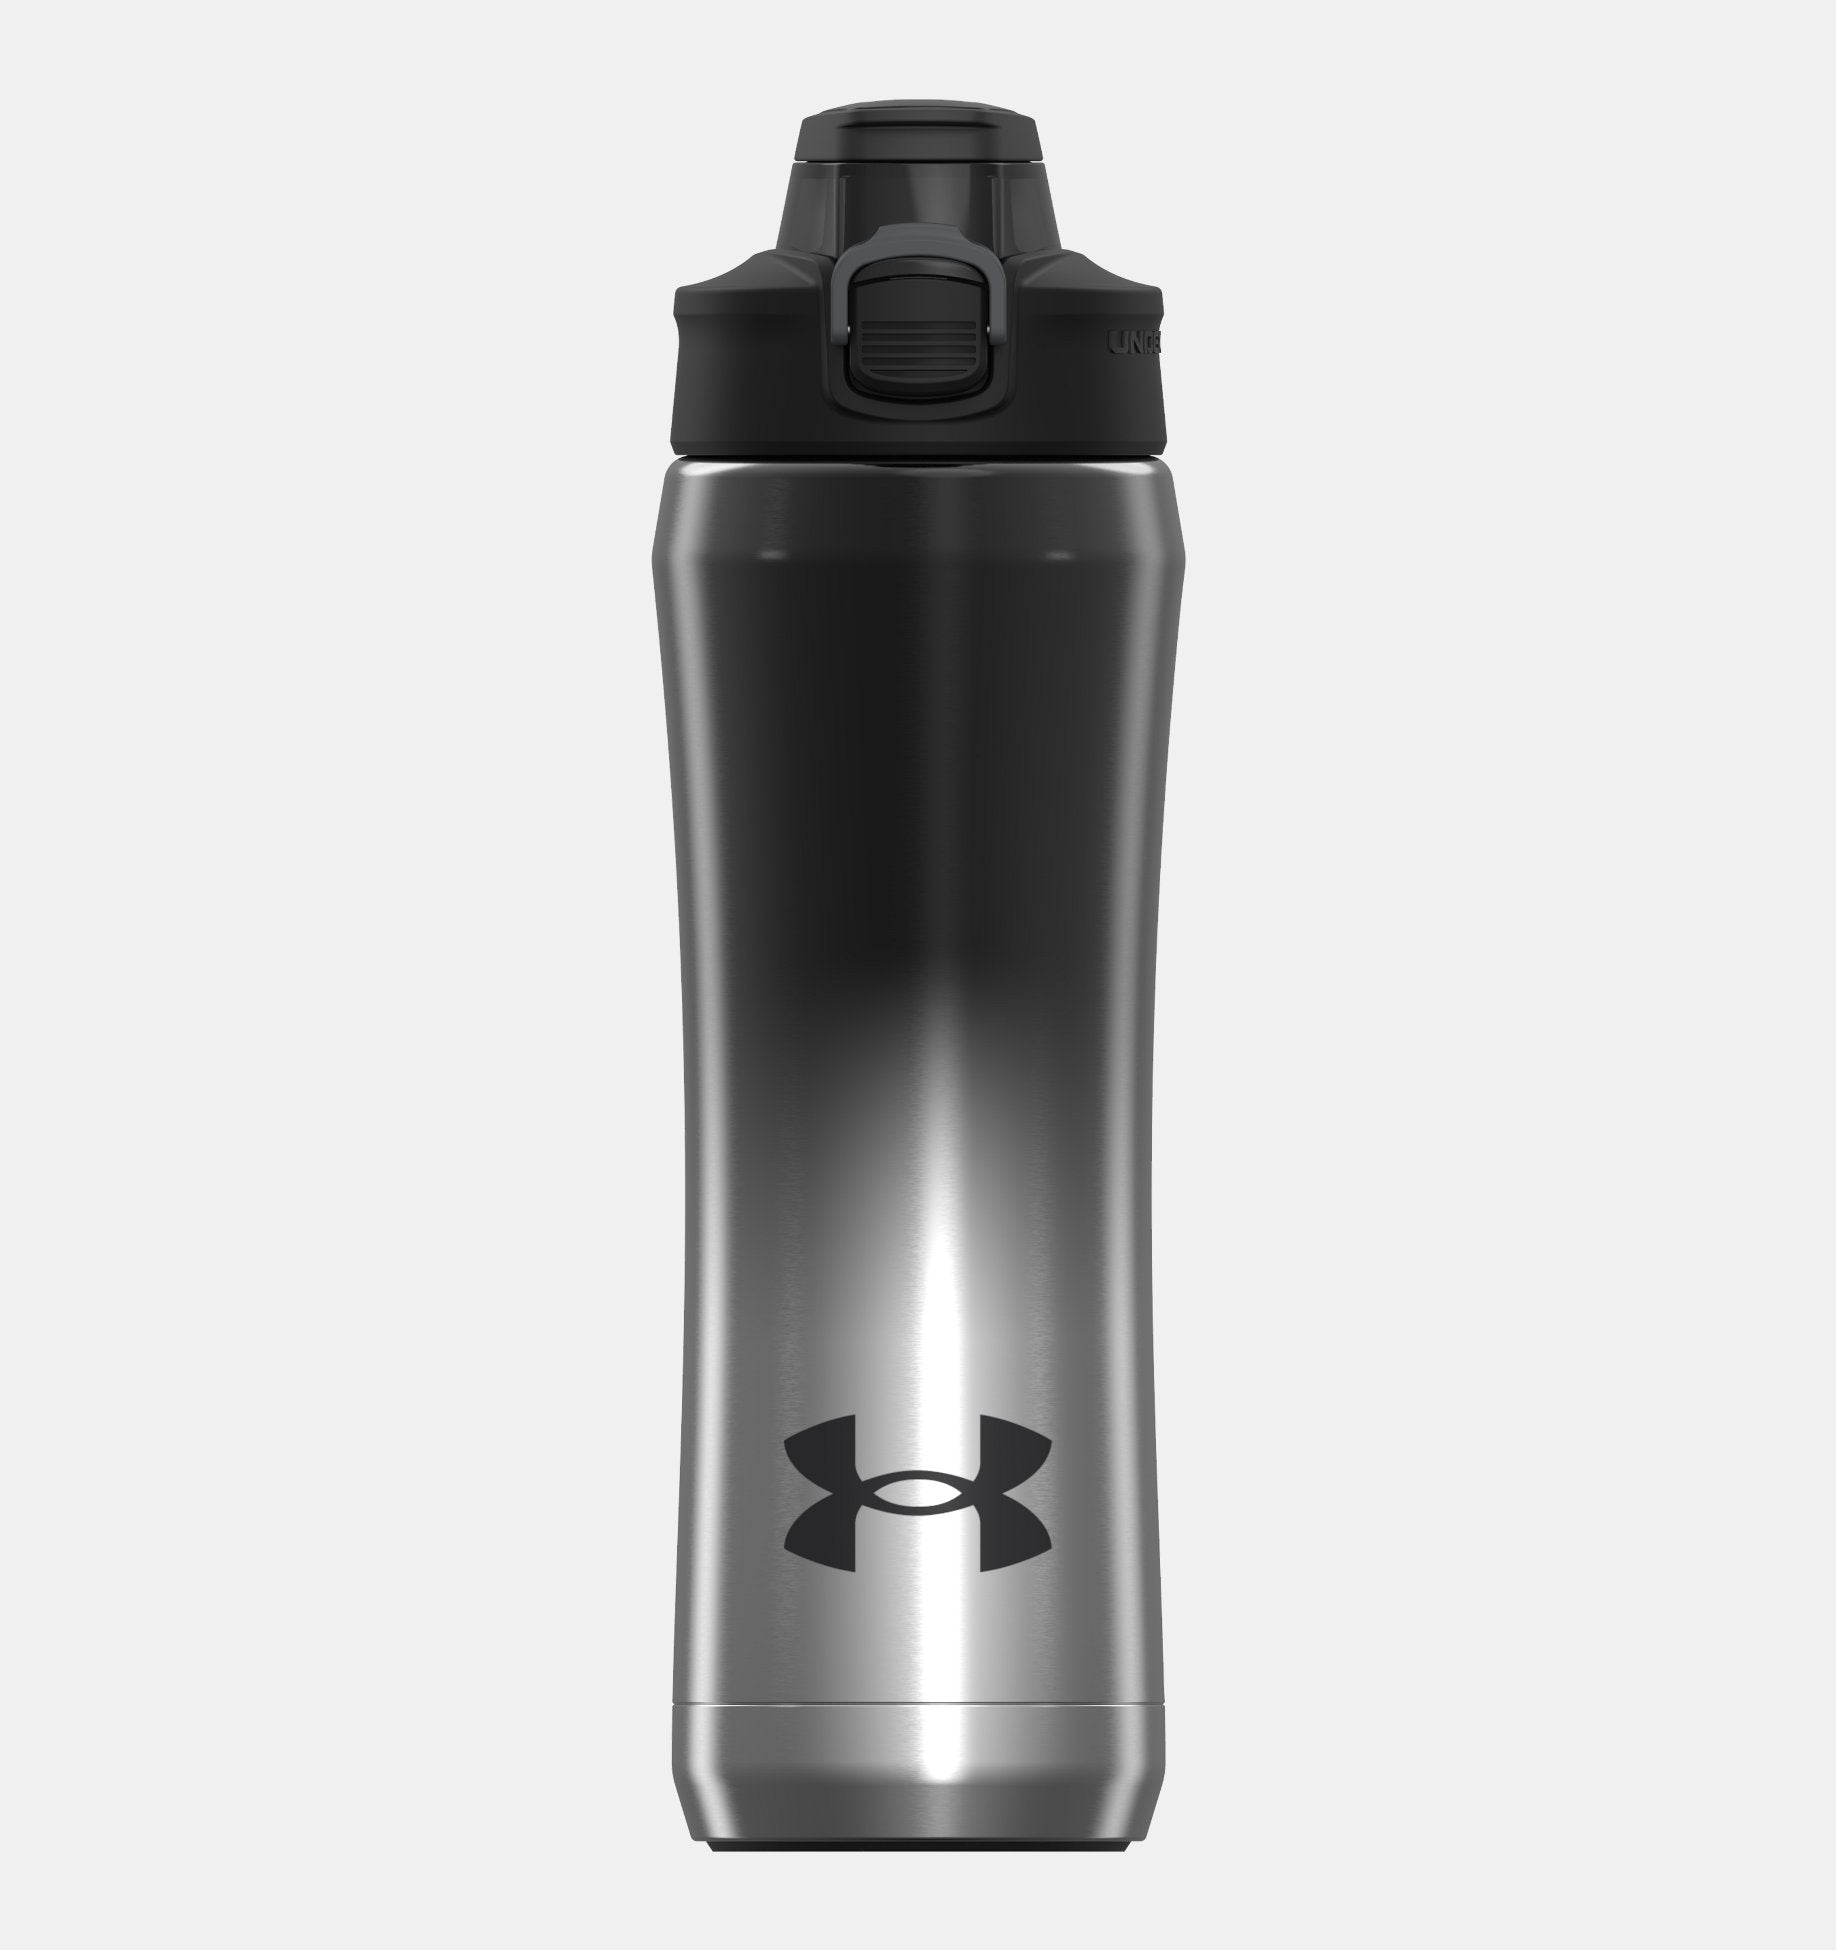 Under Armour Hydration Draft Bottle 24 oz by Thermos With Screw Top Lid  Royal